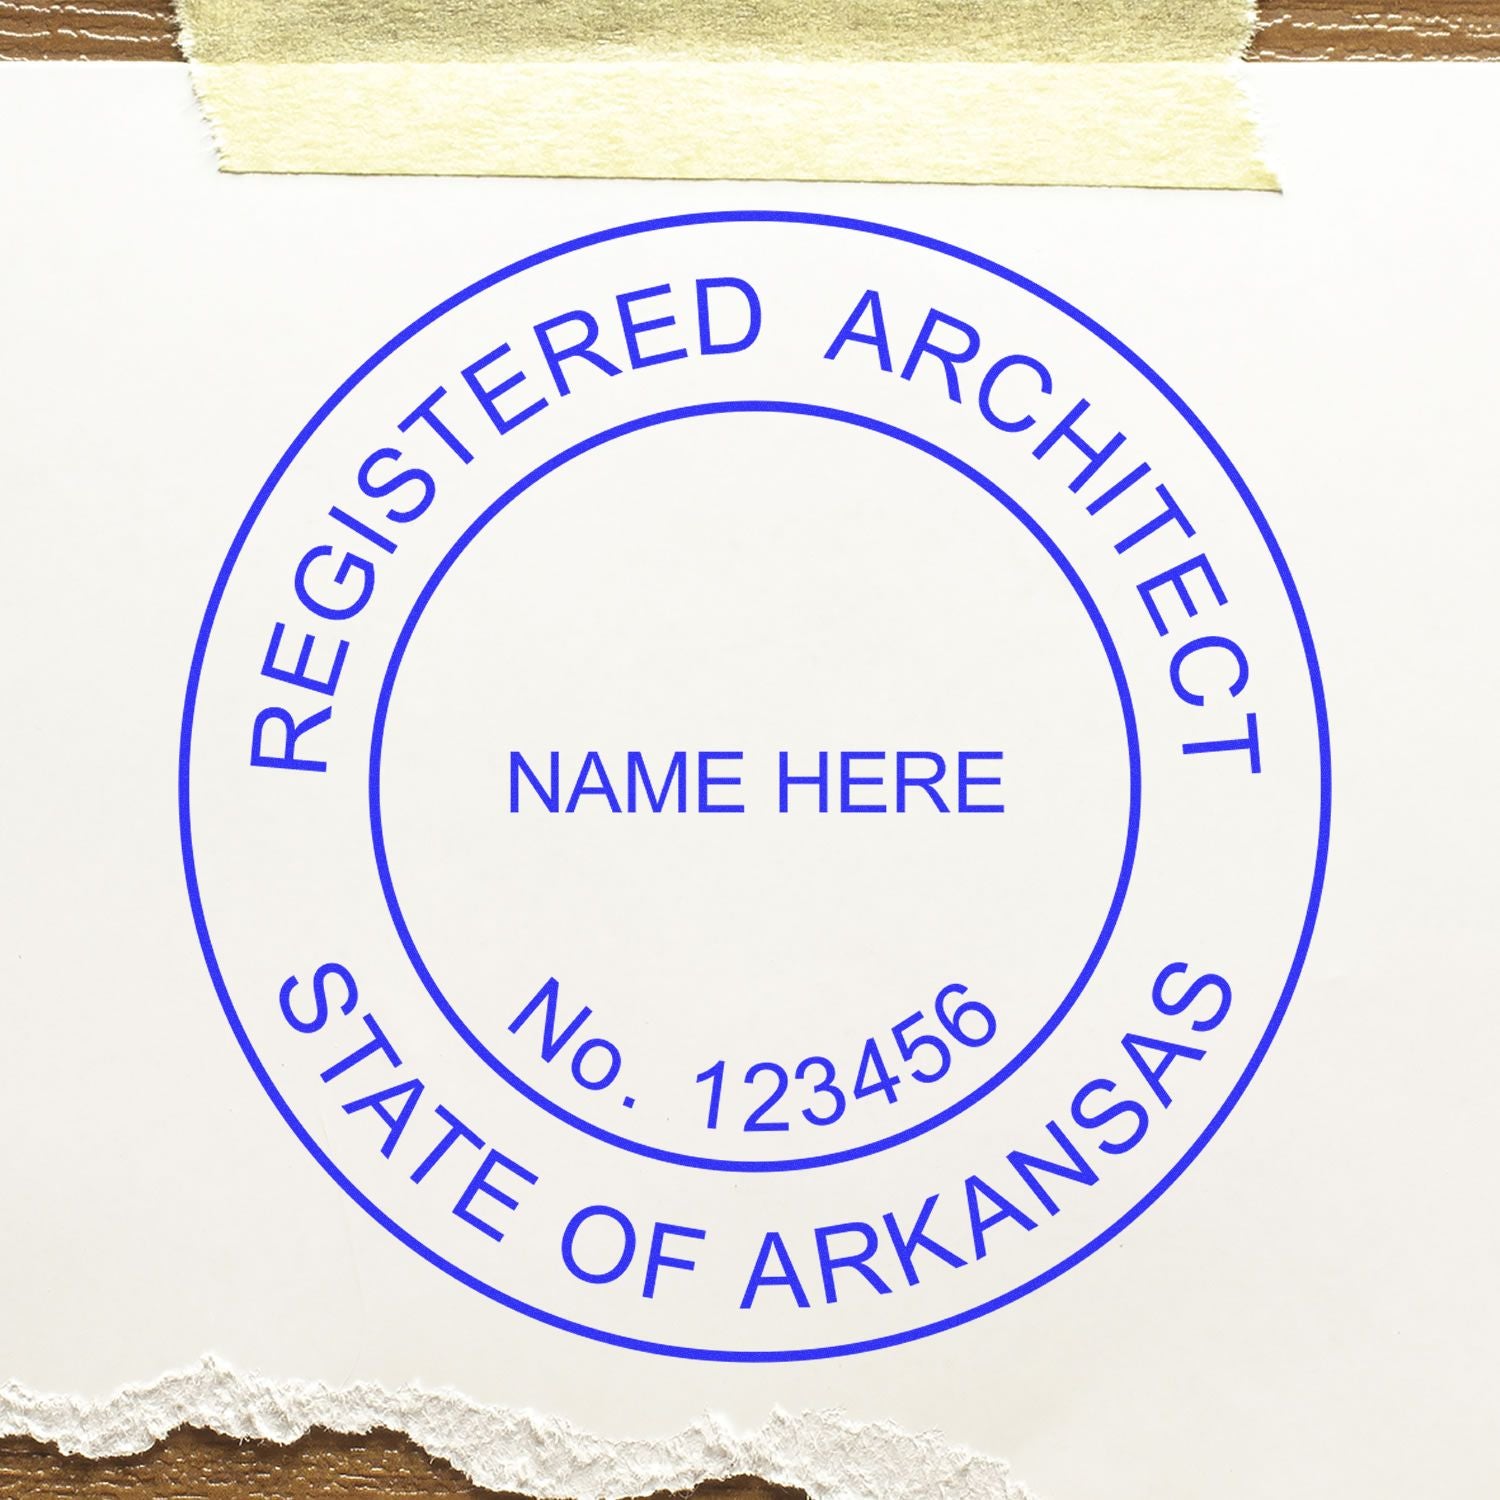 Slim Pre-Inked Arkansas Architect Seal Stamp in use photo showing a stamped imprint of the Slim Pre-Inked Arkansas Architect Seal Stamp